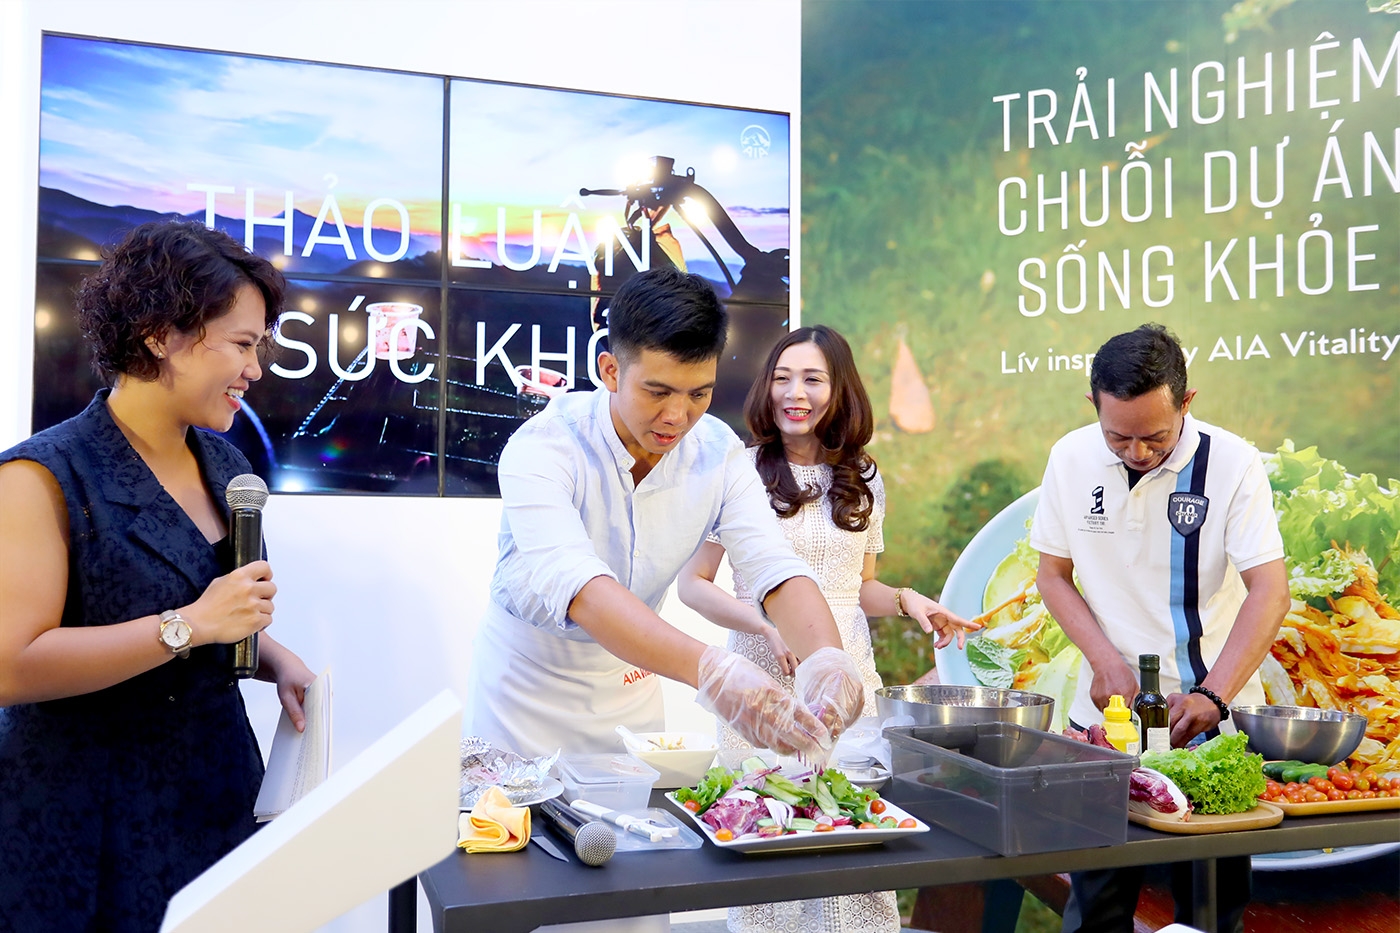 aia vietnam promotes healthy living with new content hub and cookbook